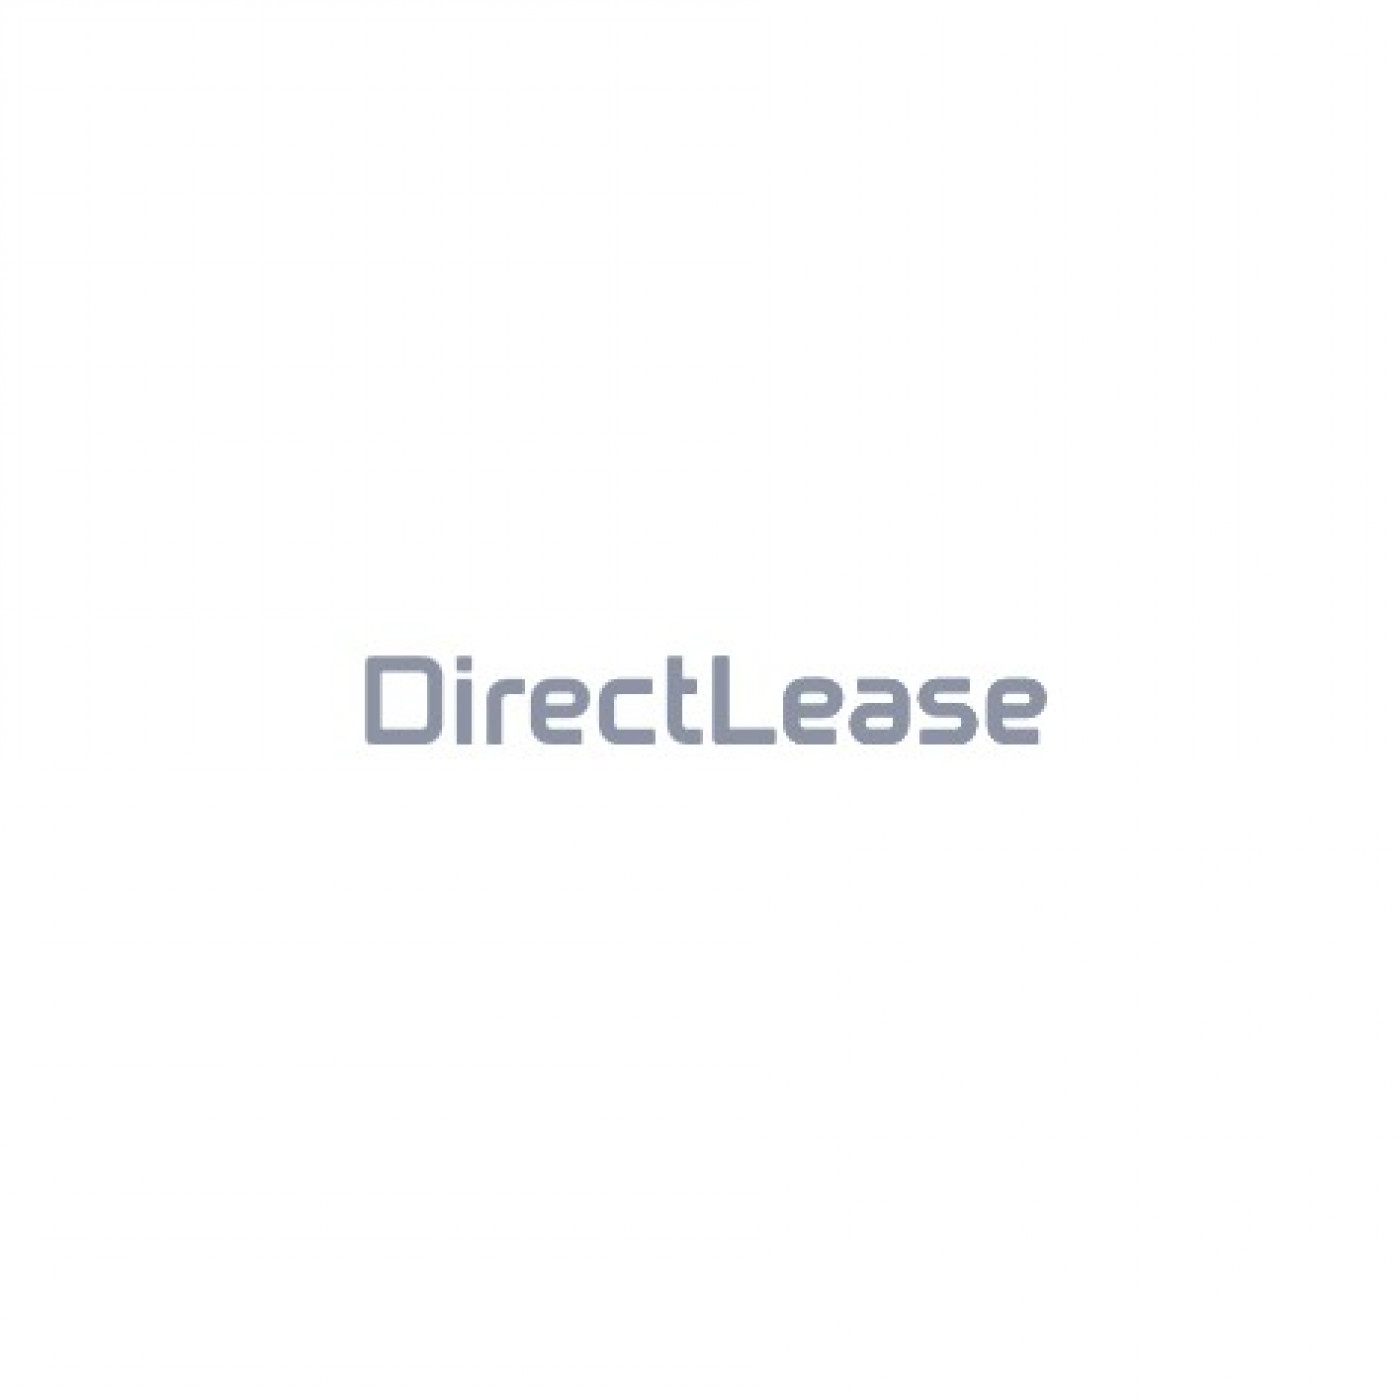 04.directlease